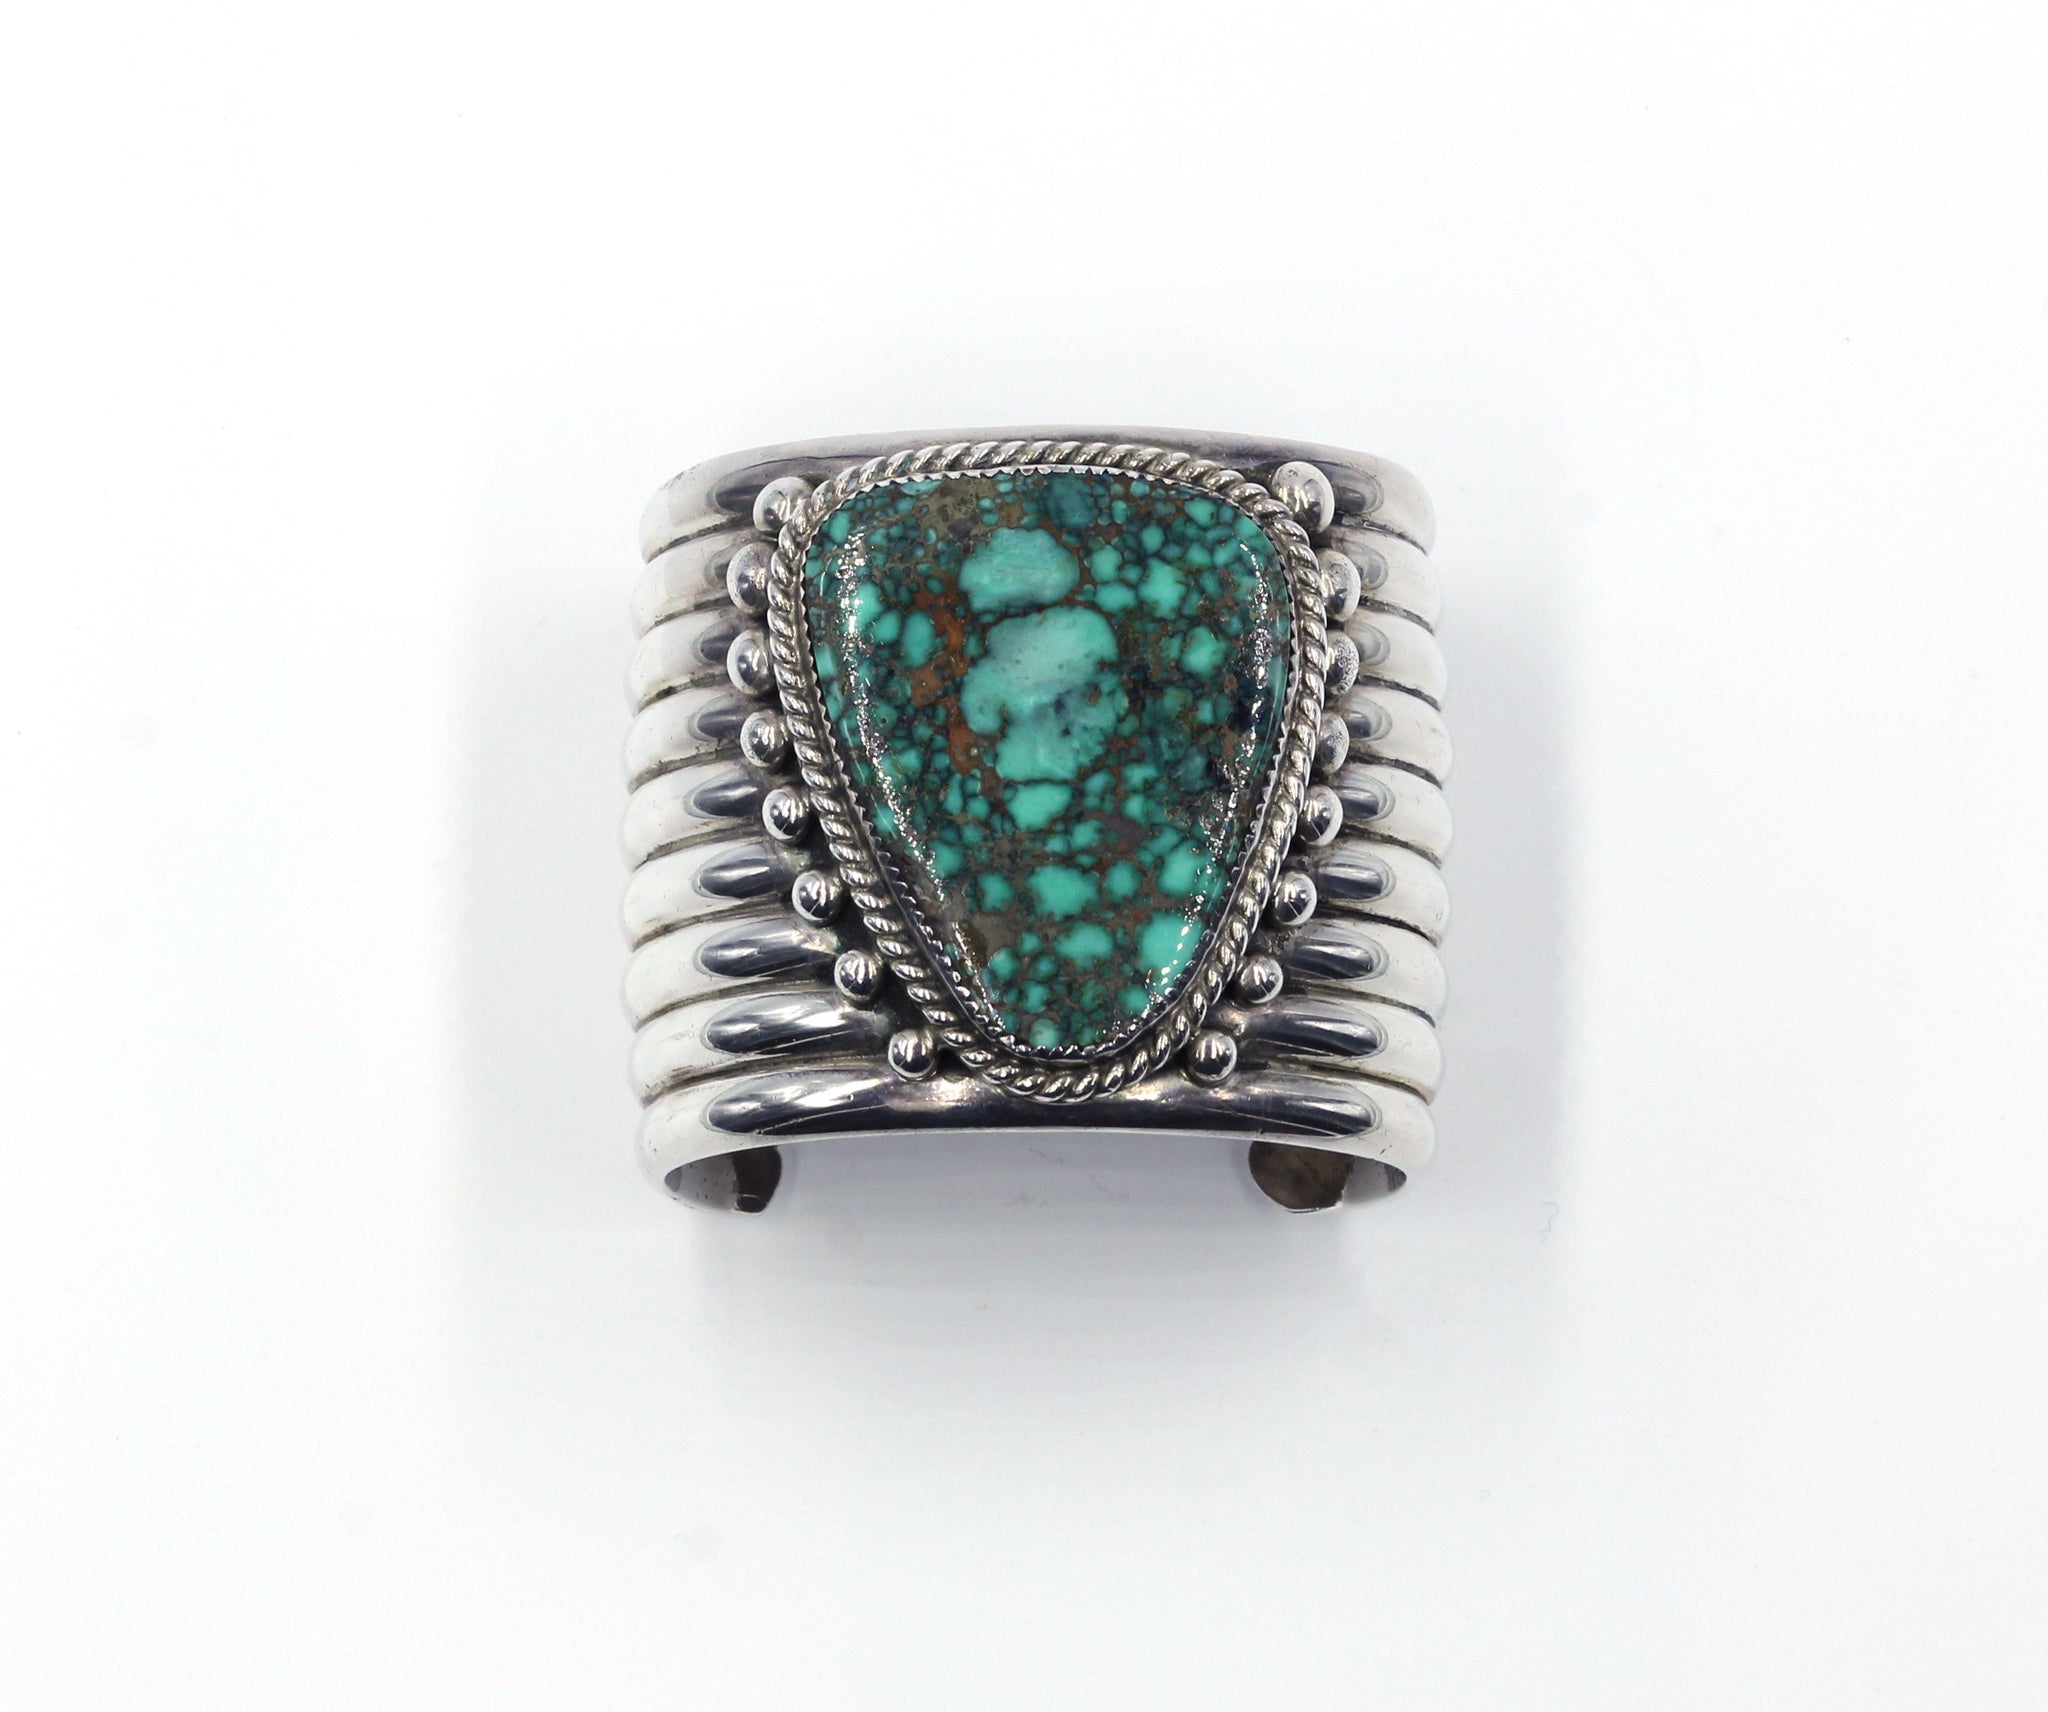 Vintage Native American Turquoise Silver Cuff Bracelet, SOLD